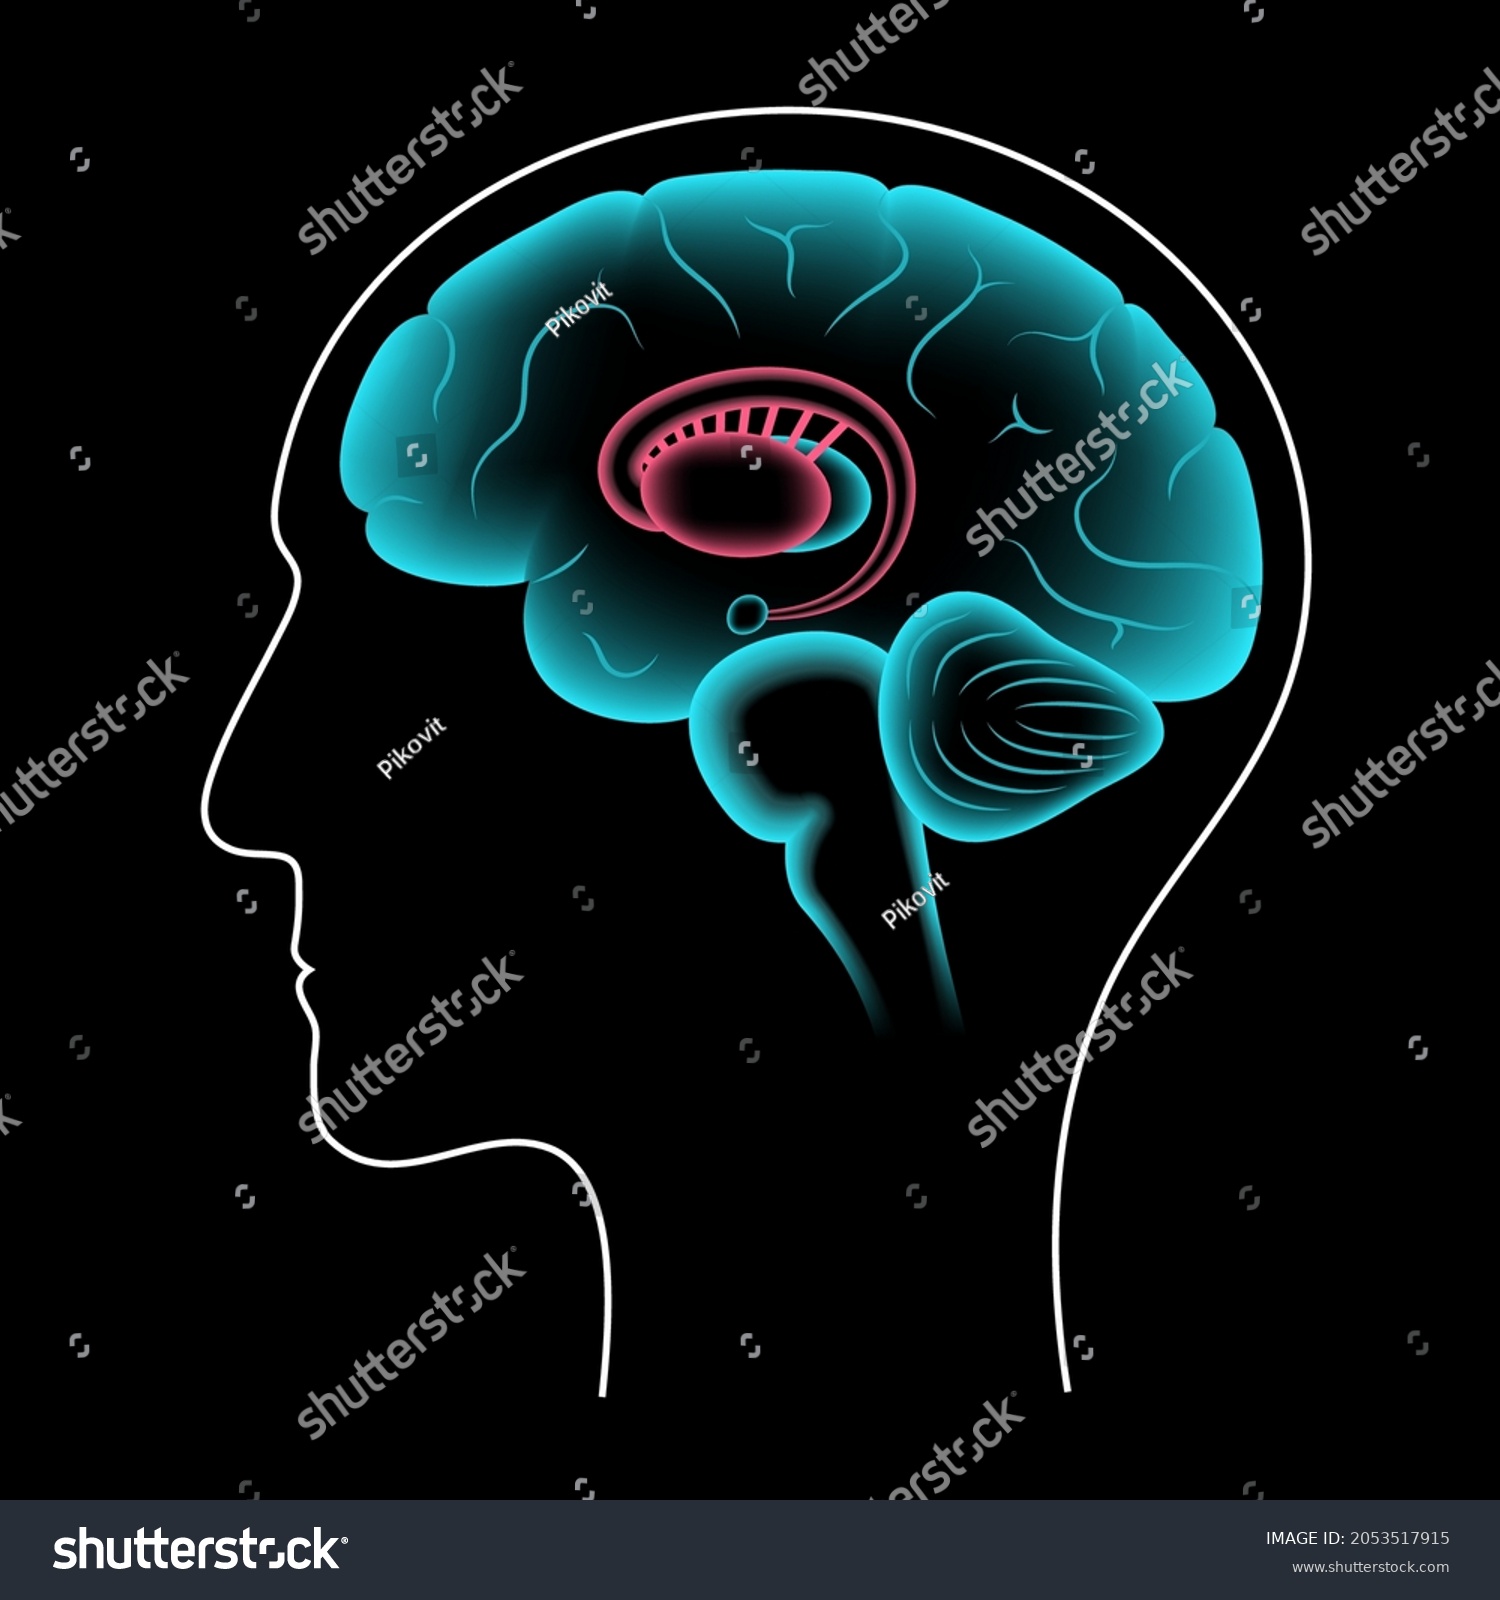 SVG of Basal ganglia and limbic system concept. Human brain anatomy. Cerebral cortex and cerebellum medical poster flat vector illustration for clinic or education. svg